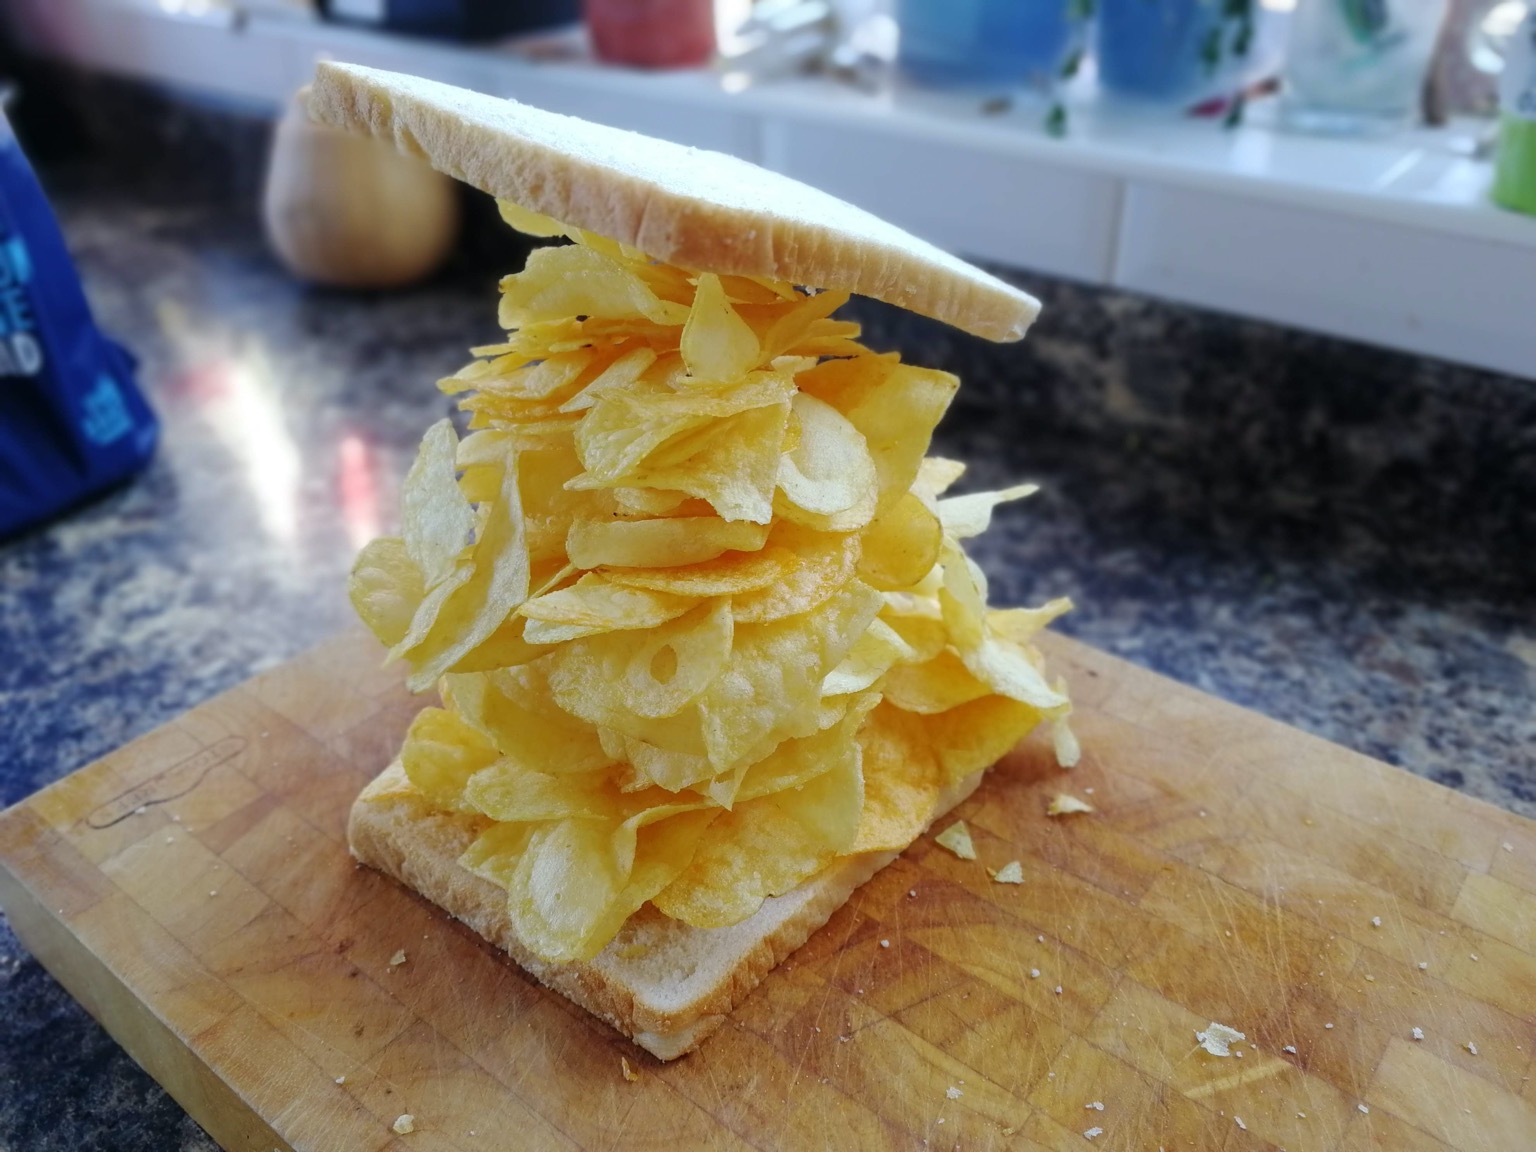 Massively overfilled crisp sandwich with precarious lid